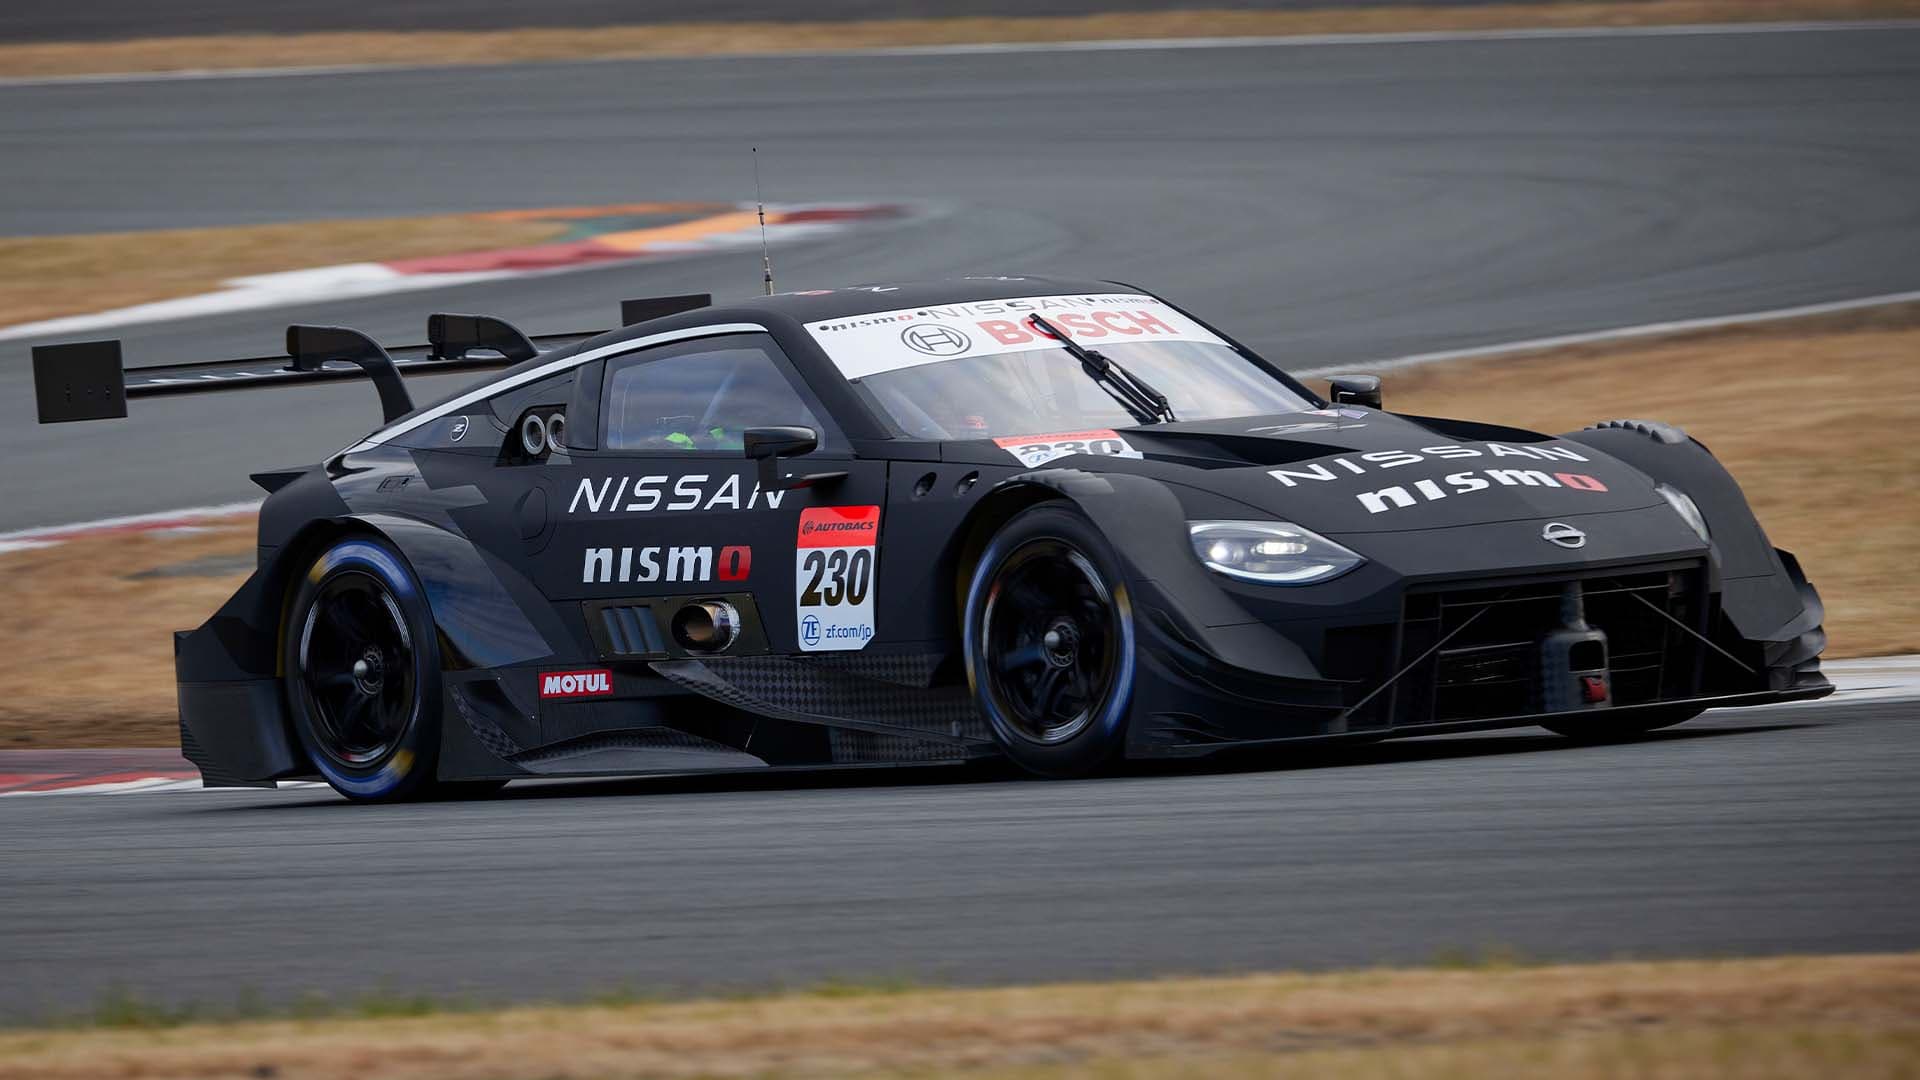 Widebody Nissan Z GT500 Race Car Will Battle the Acura NSX, Toyota Supra in Super GT